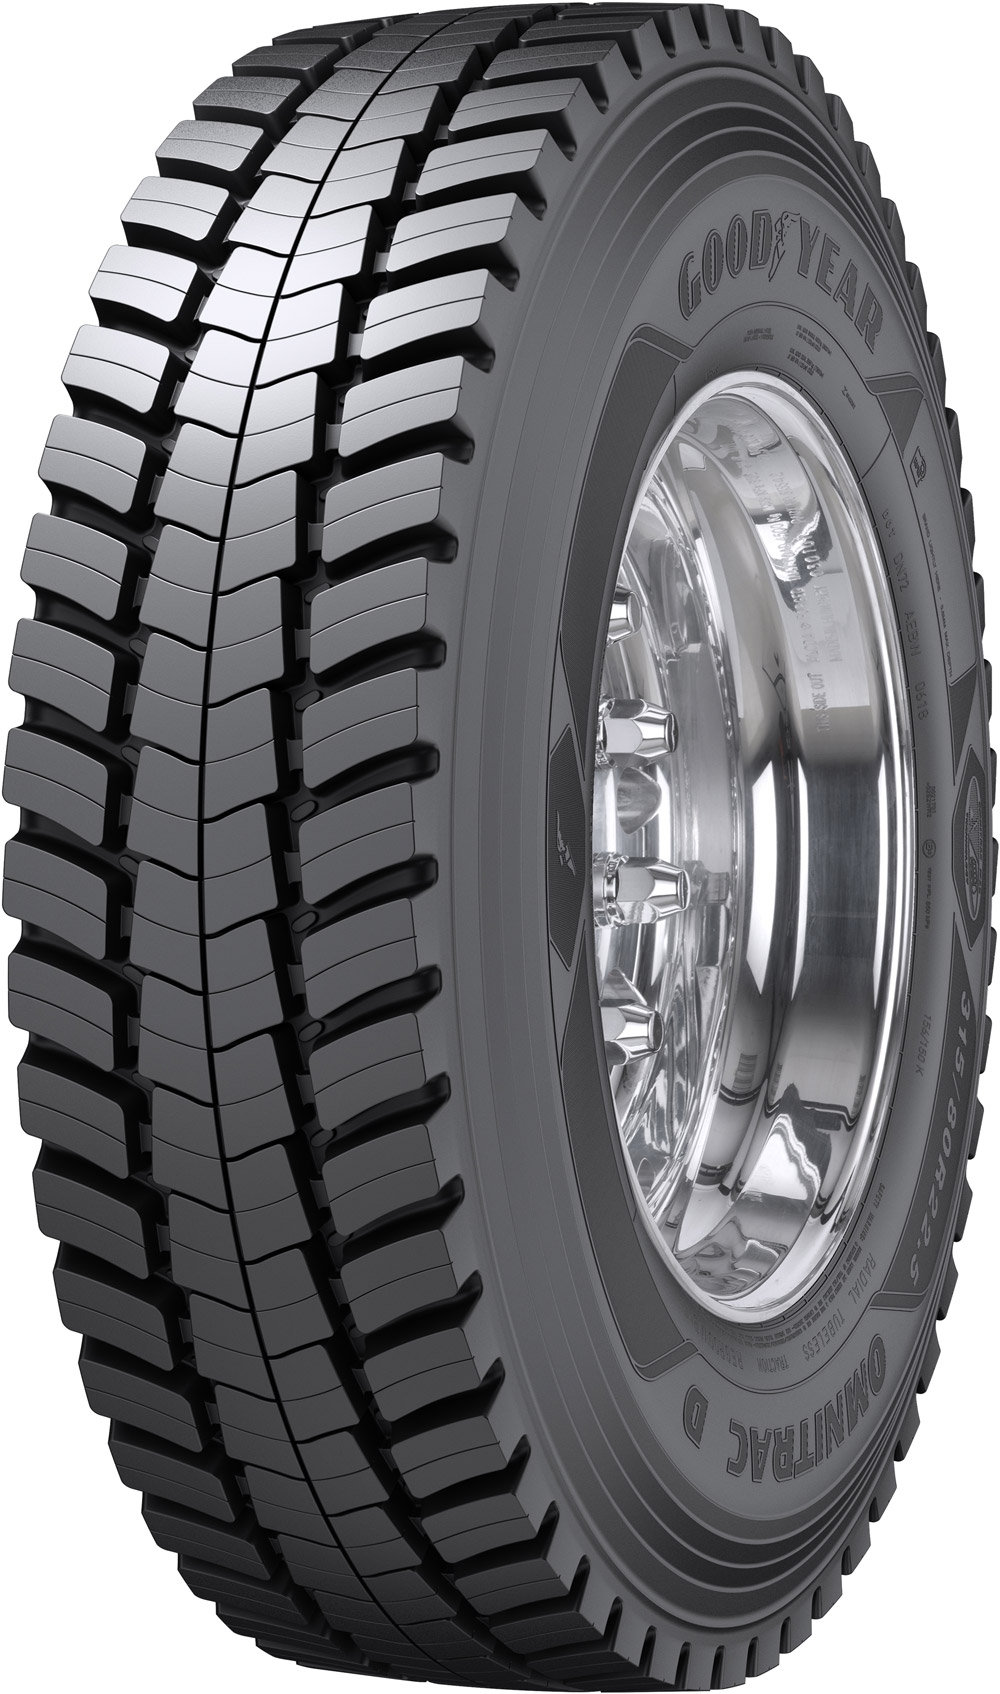 product_type-heavy_tires GOODYEAR OMNITRAC D 3PMSF 13 R22.5 156K